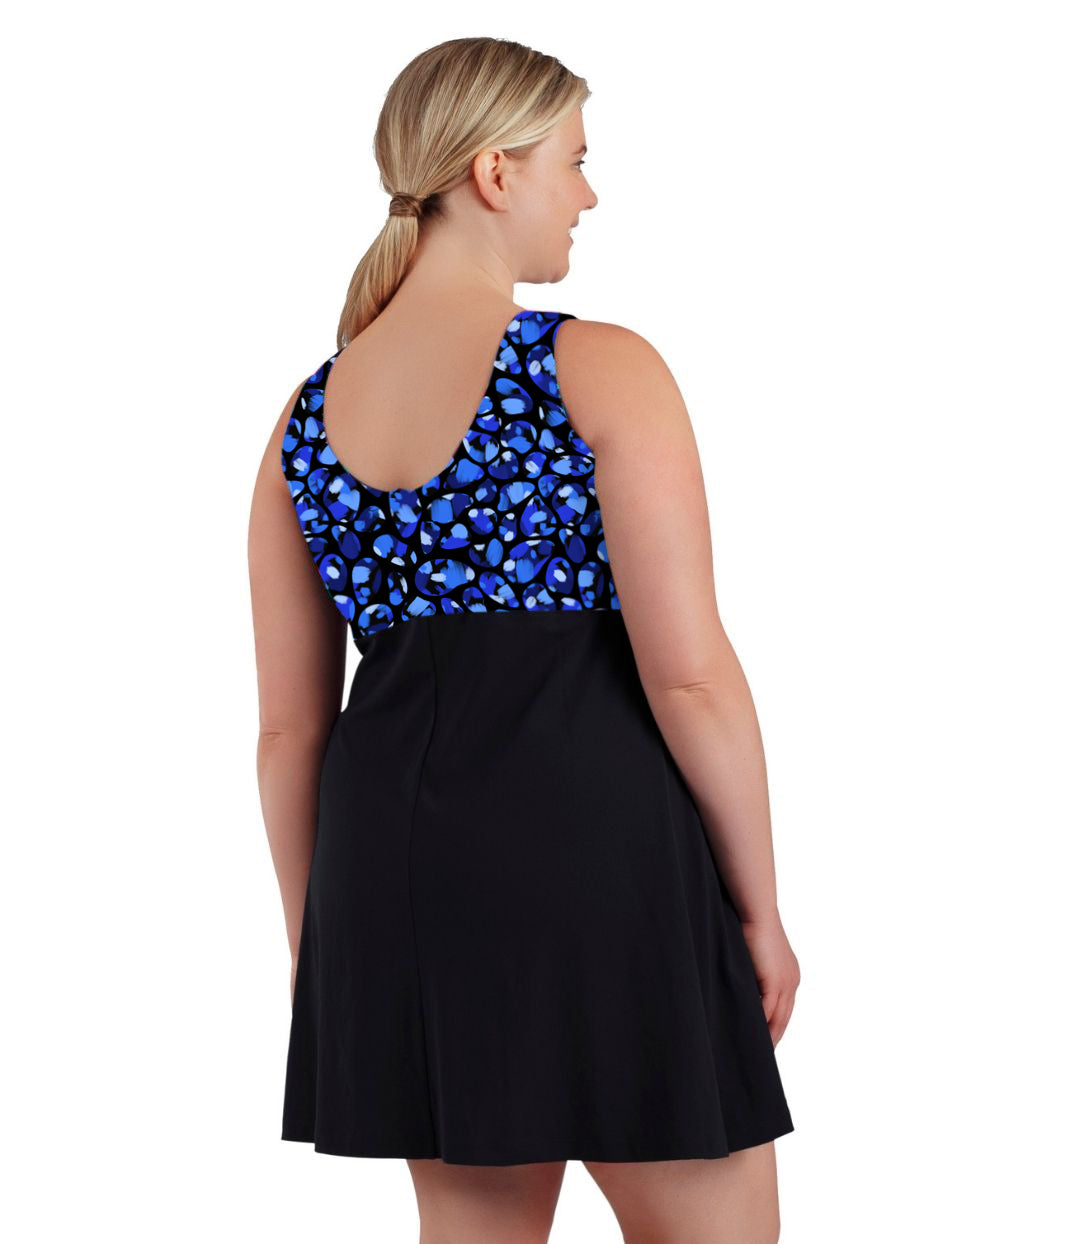 Plus size woman, back view, wearing JunoActive plus size Aquasport Zip Front Swim Dress Ocean Blues Print Black. The top of the swim dress has a multi colored blue bubble print and scoop back. The bottom is solid black, has a slight a-line shape and ends mid-thigh.